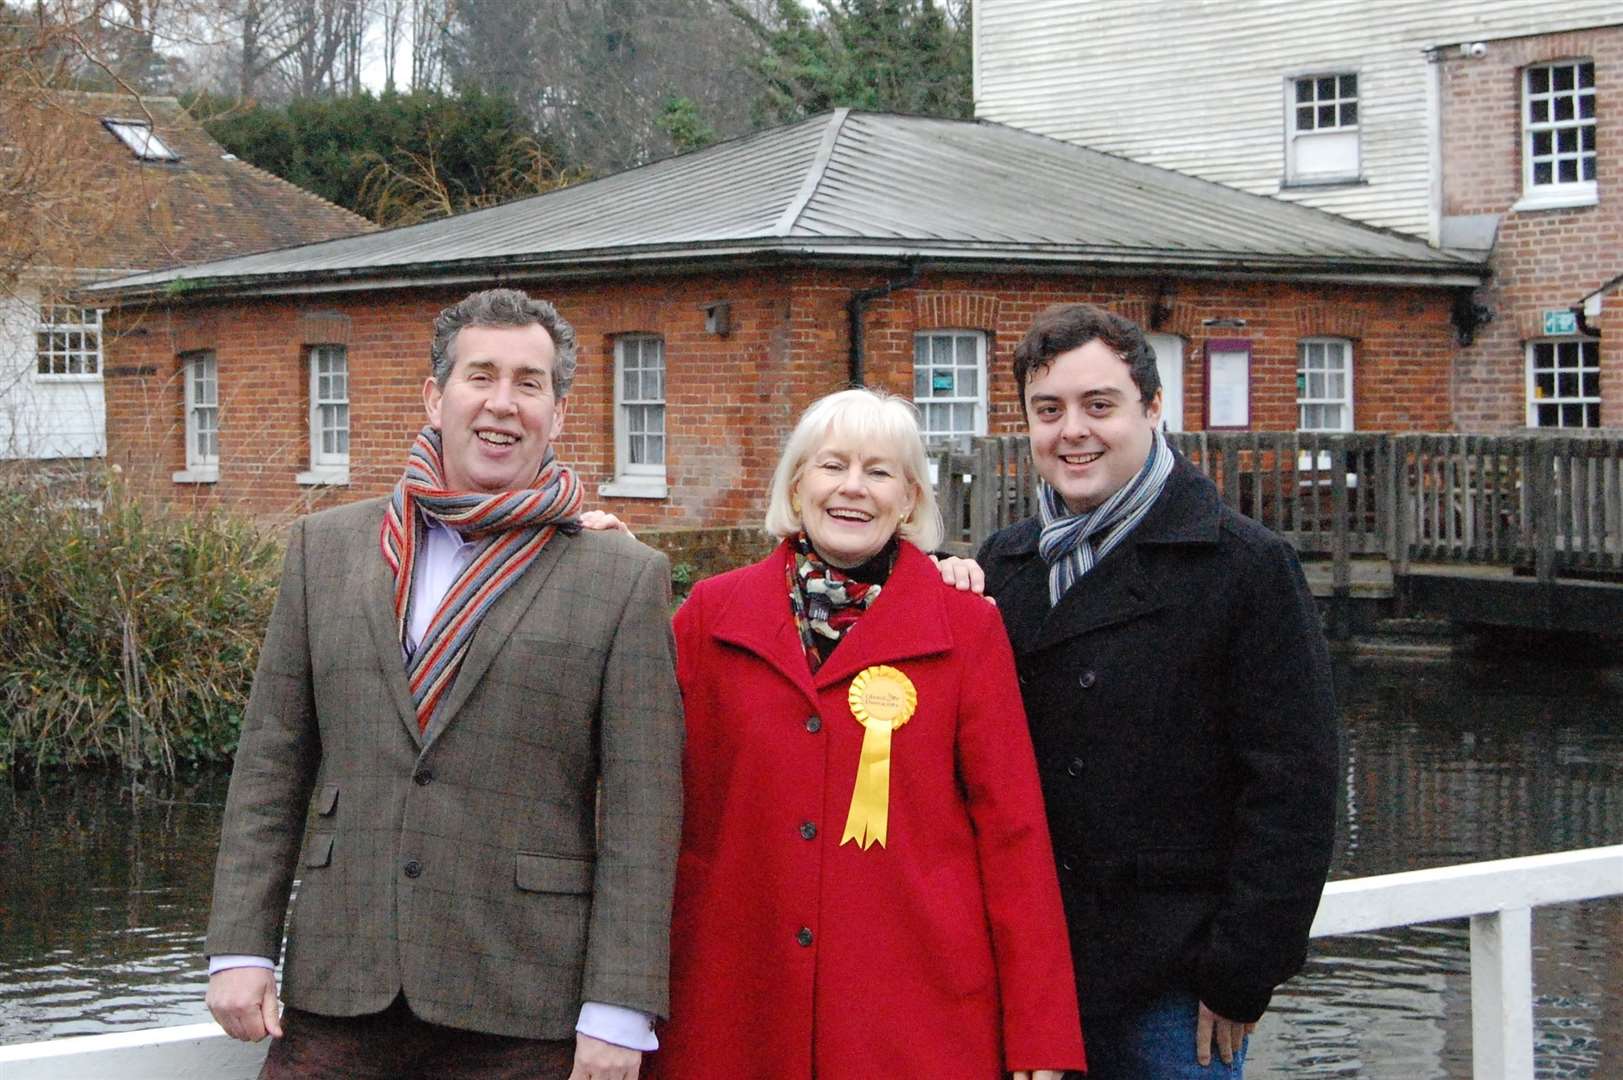 Steve Green, Penelope James and Aston Mannerings are among the Liberal Democrats' 12 candidates